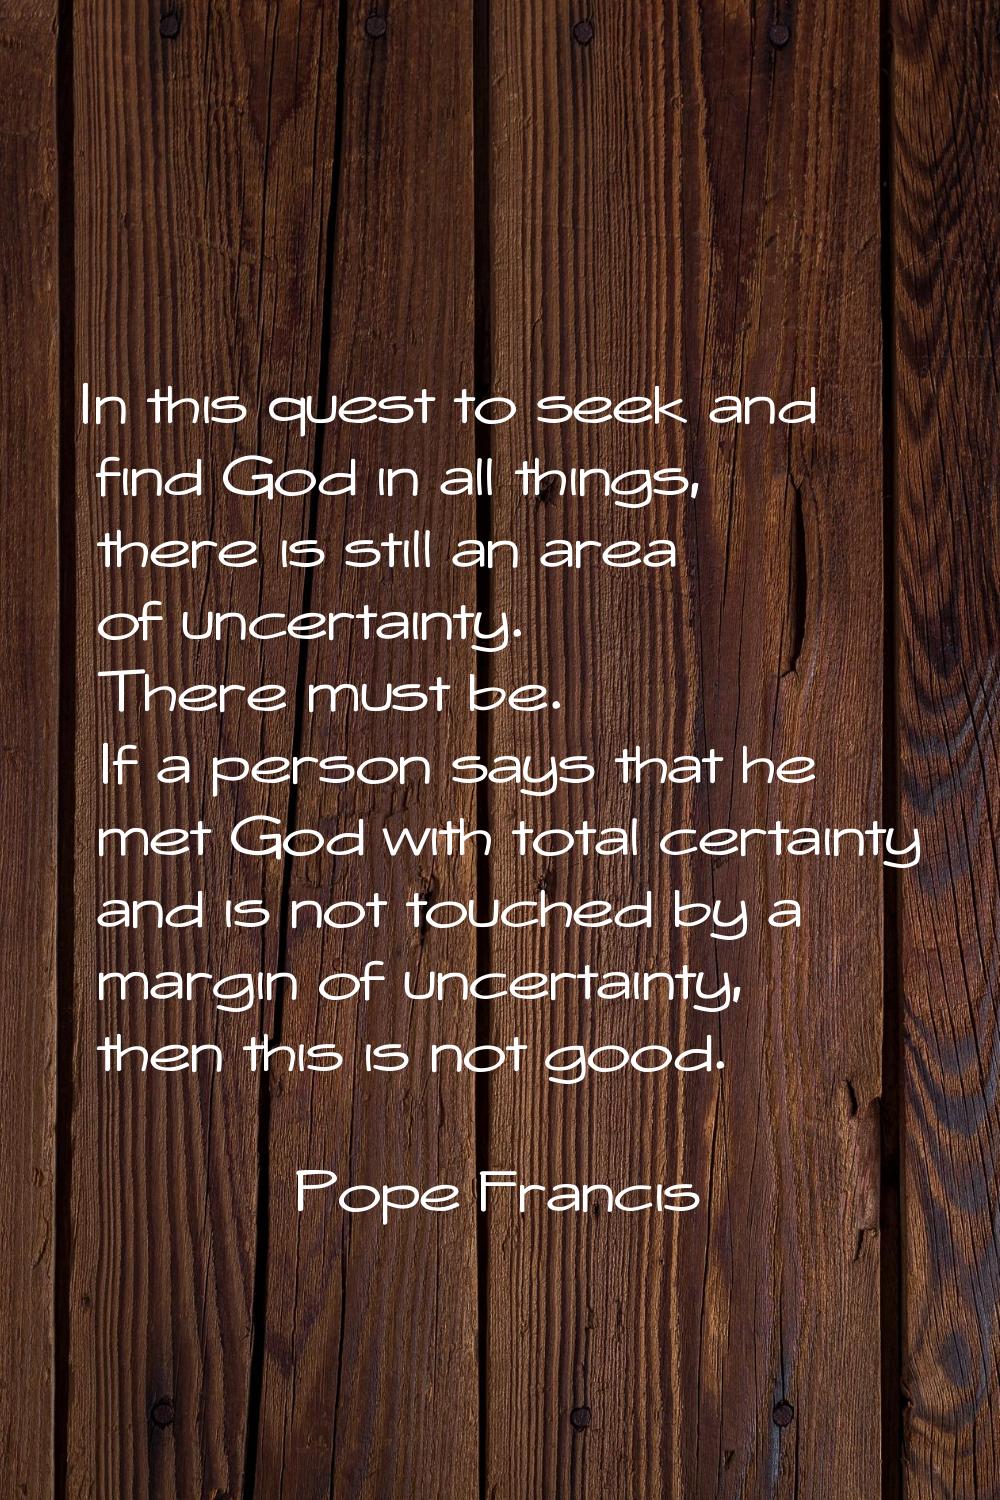 In this quest to seek and find God in all things, there is still an area of uncertainty. There must